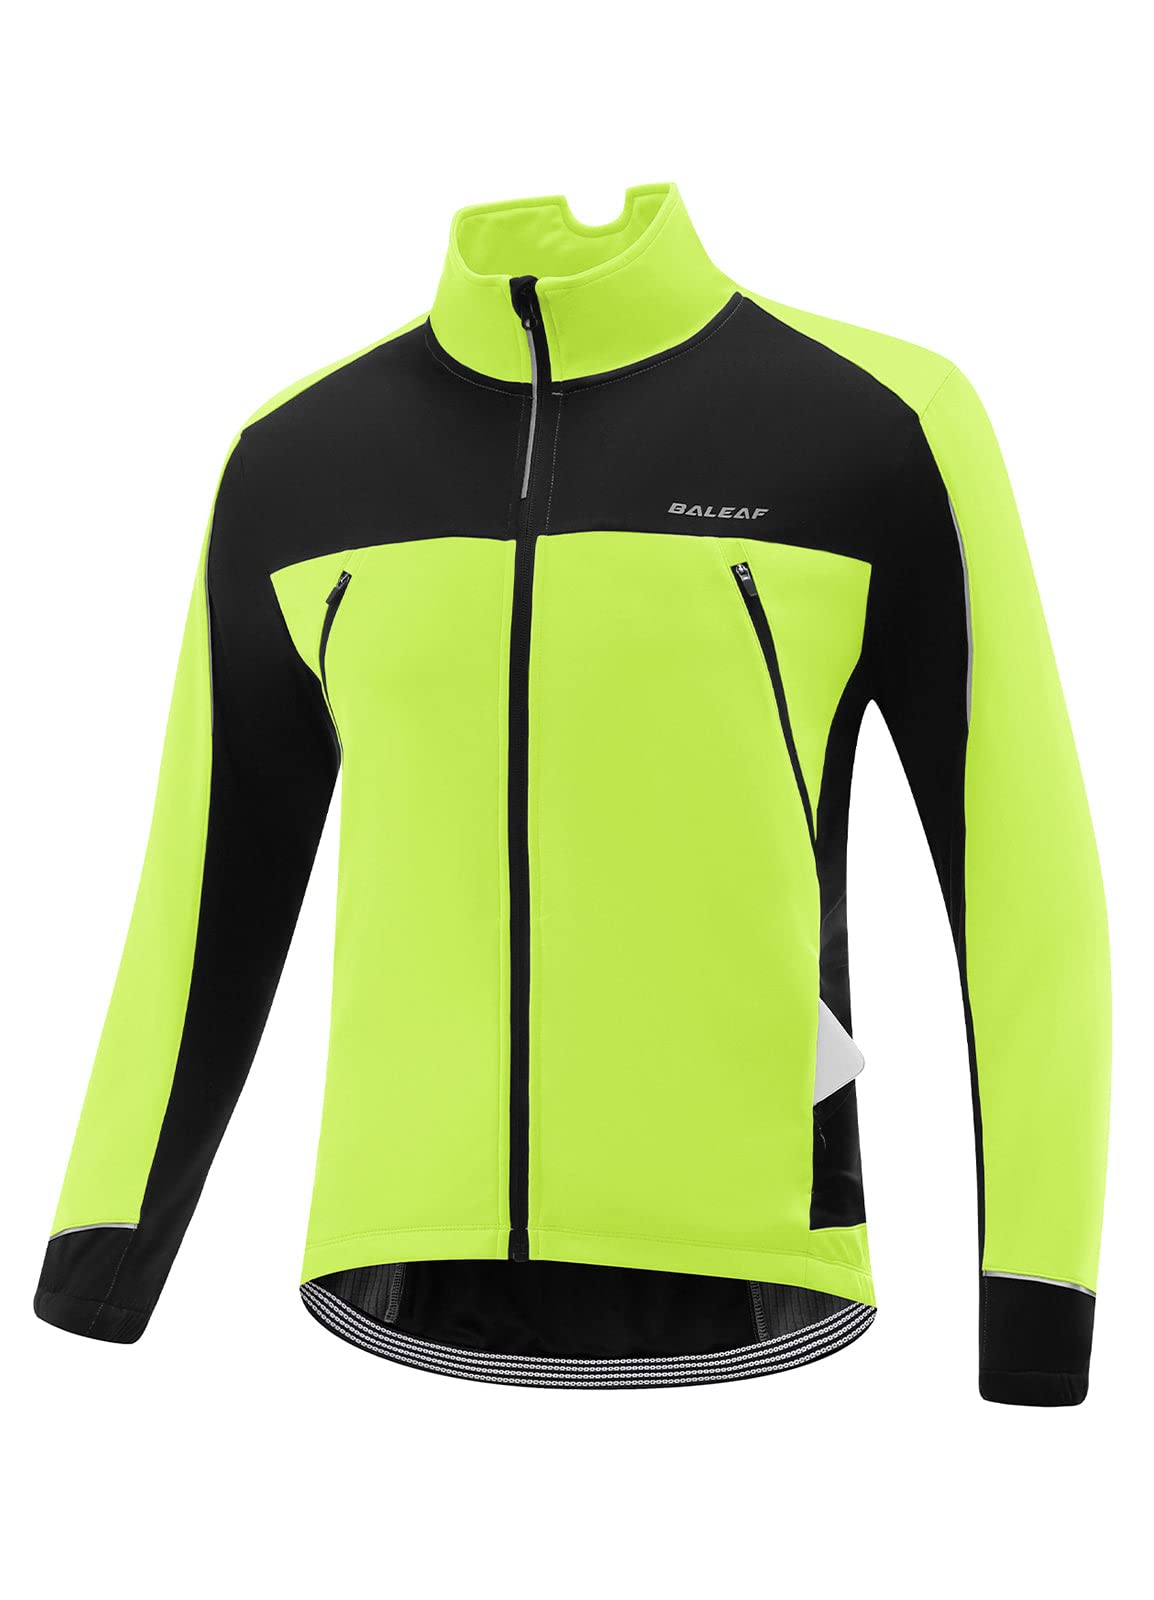 BALEAF Mens Winter Jacket Windproof Softshell Thermal Warm Pockets Cycling Running Mountain Biking Cold Weather Gear green